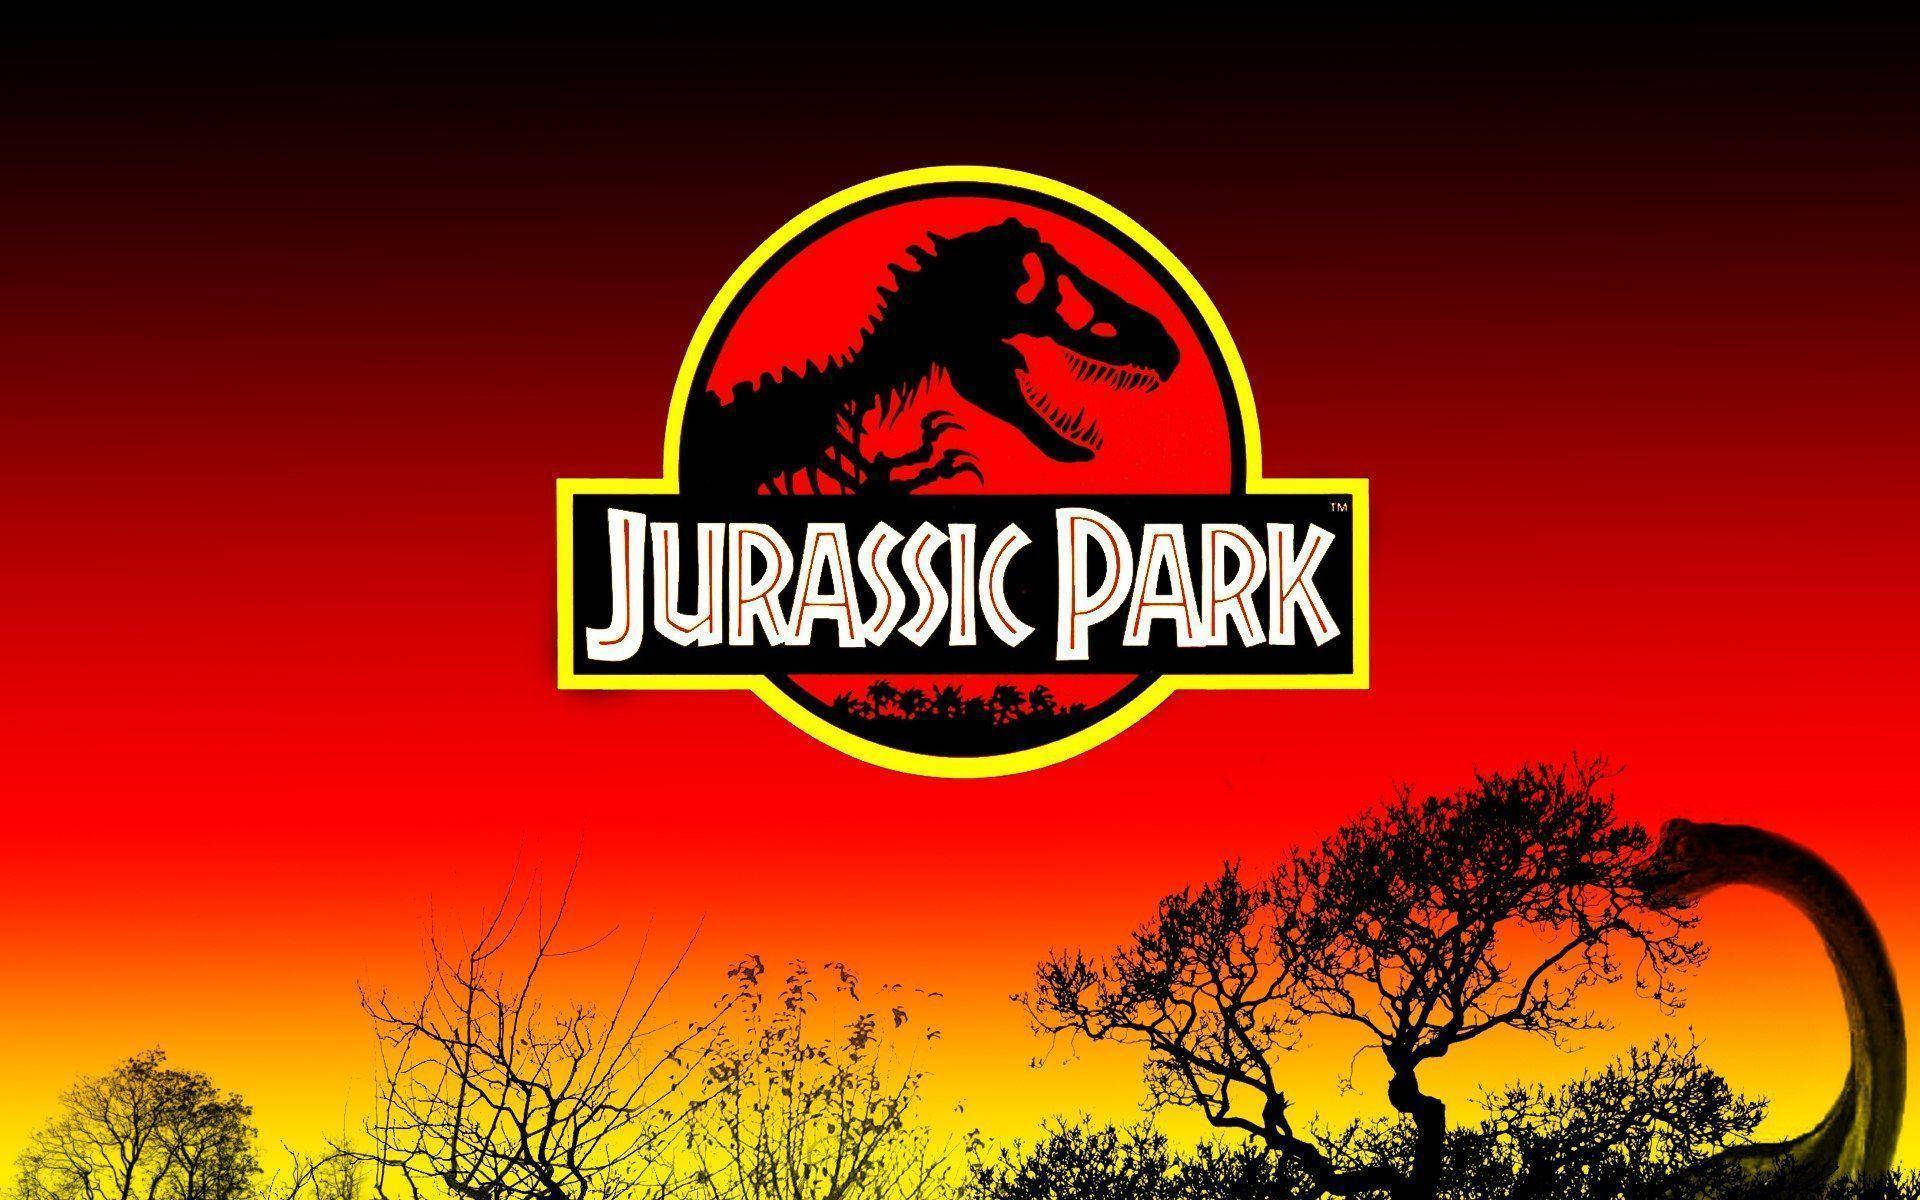 Free Jurassic Park Pictures , [100+] Jurassic Park Pictures for FREE |  Wallpapers.com